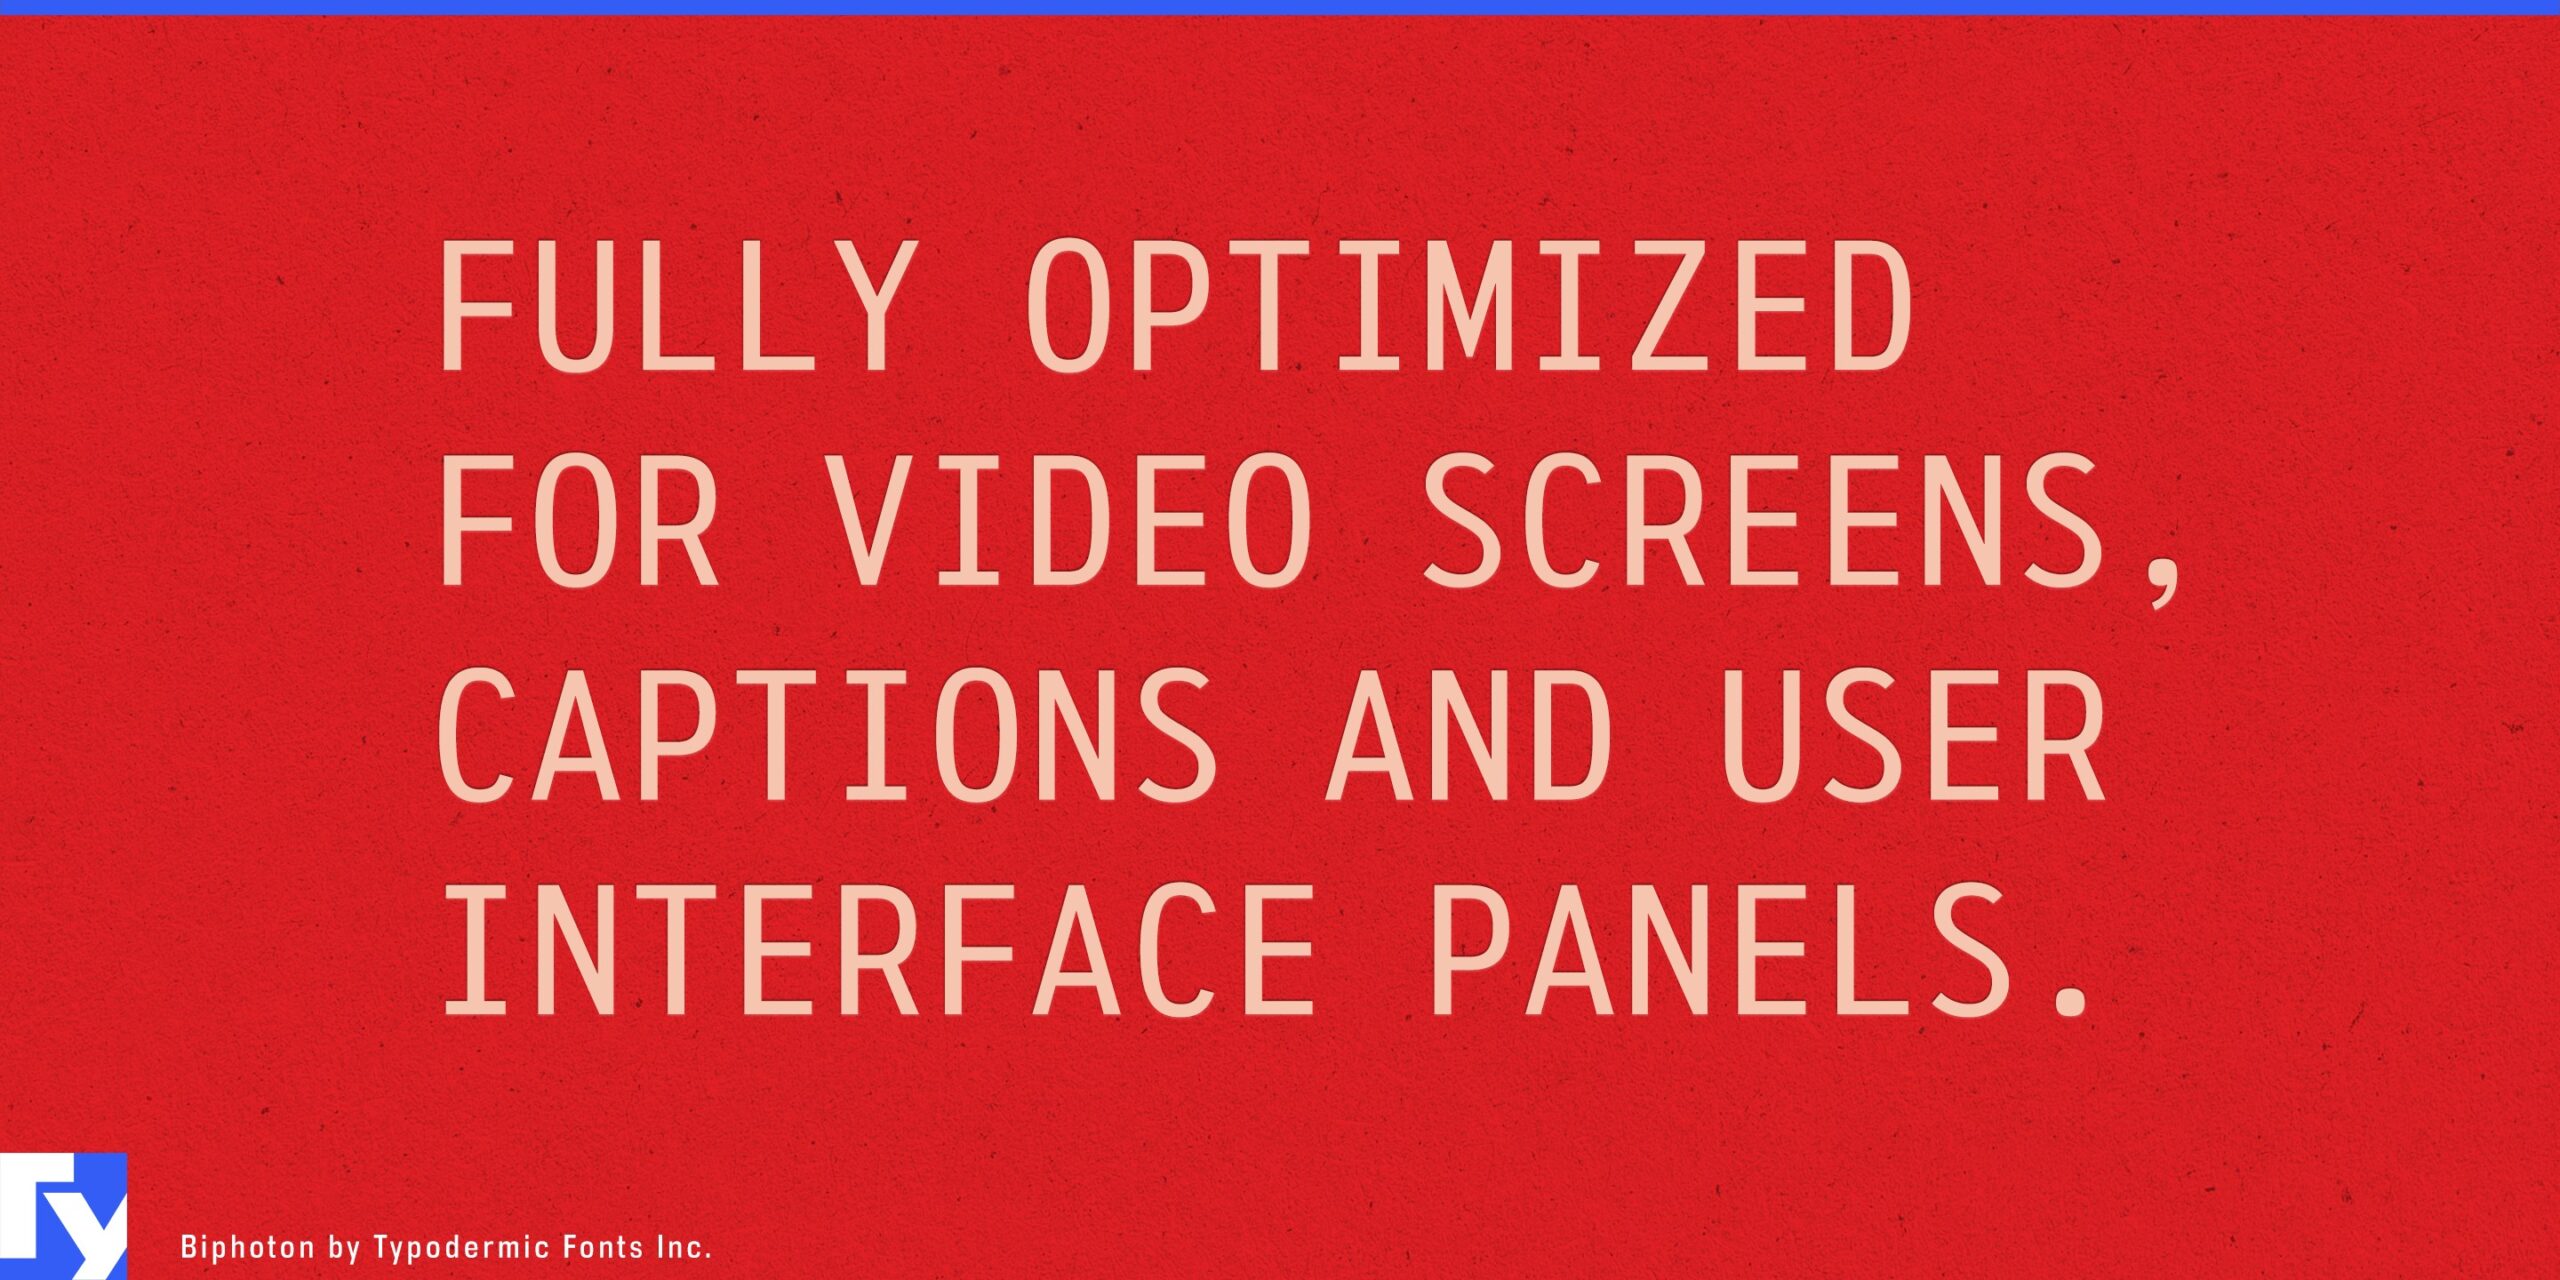 Unleash Clarity and Impact with Biphoton's Optimized Screen Performance